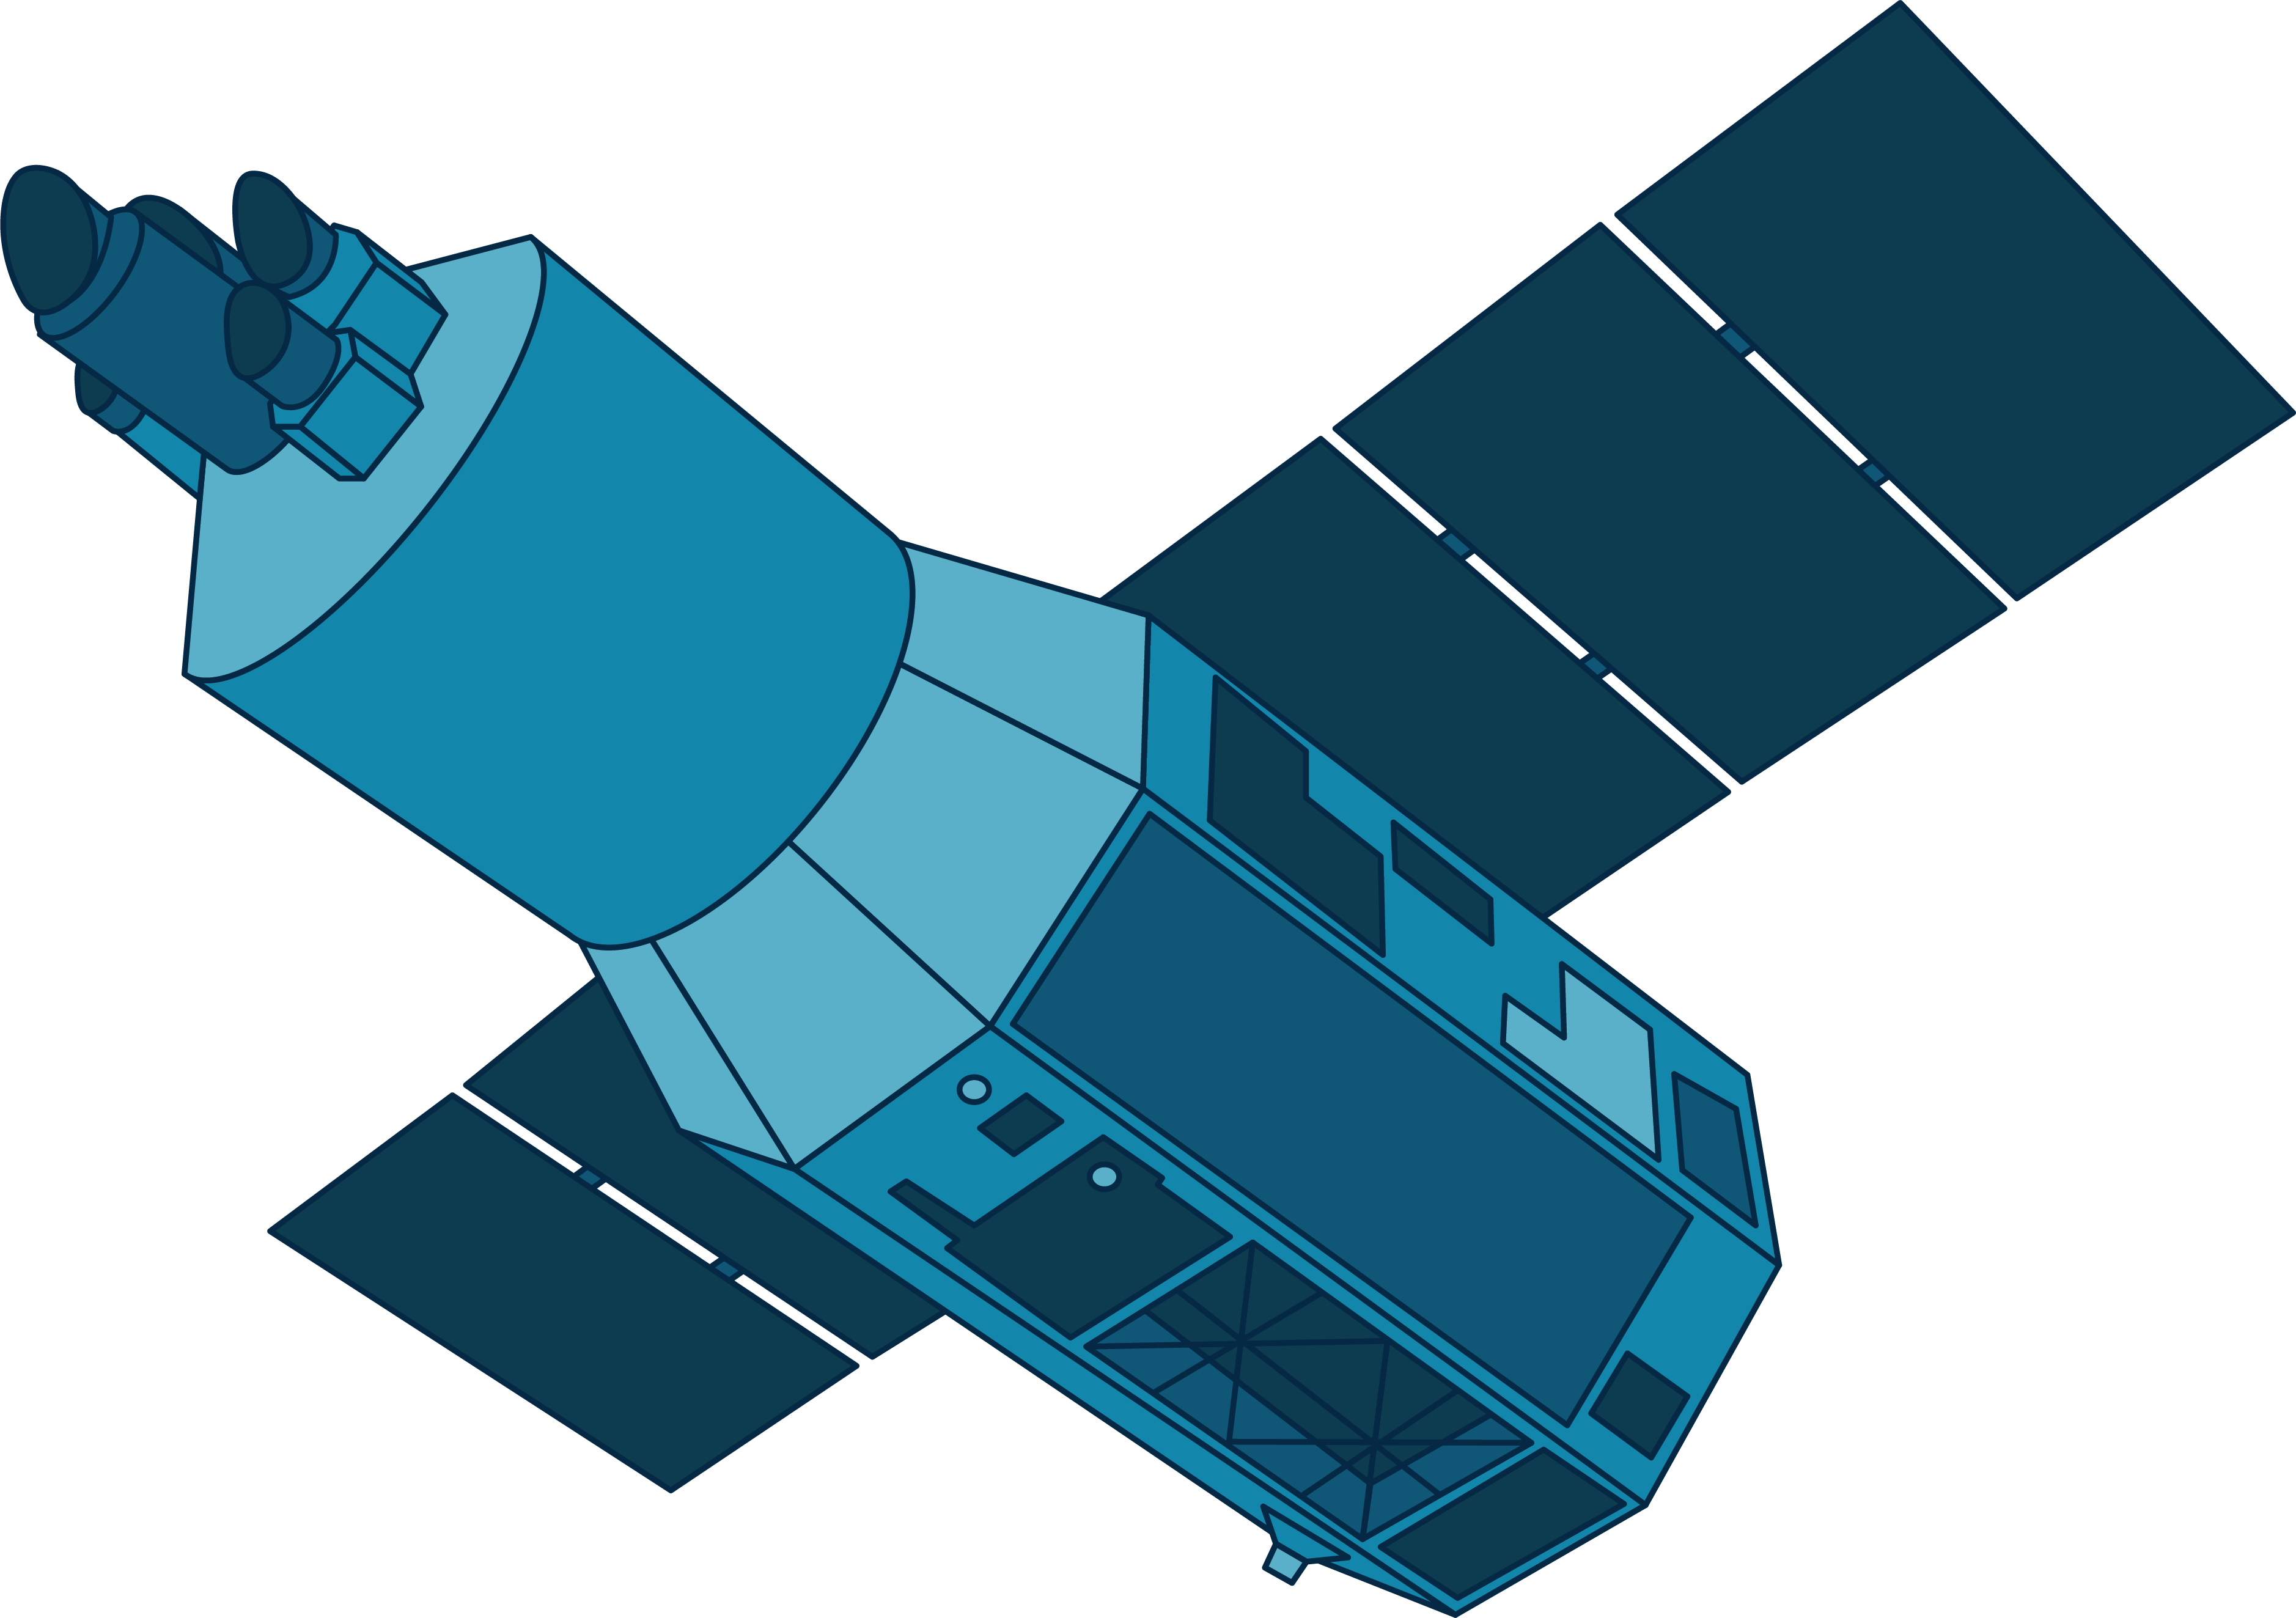 This illustration shows NASA's XRISM spacecraft in shades of blue. A multi-sided cylindrical body has solar array "wings" on either side and a smaller, rounded cylindrical front with small pieces of the instrument at the very front.